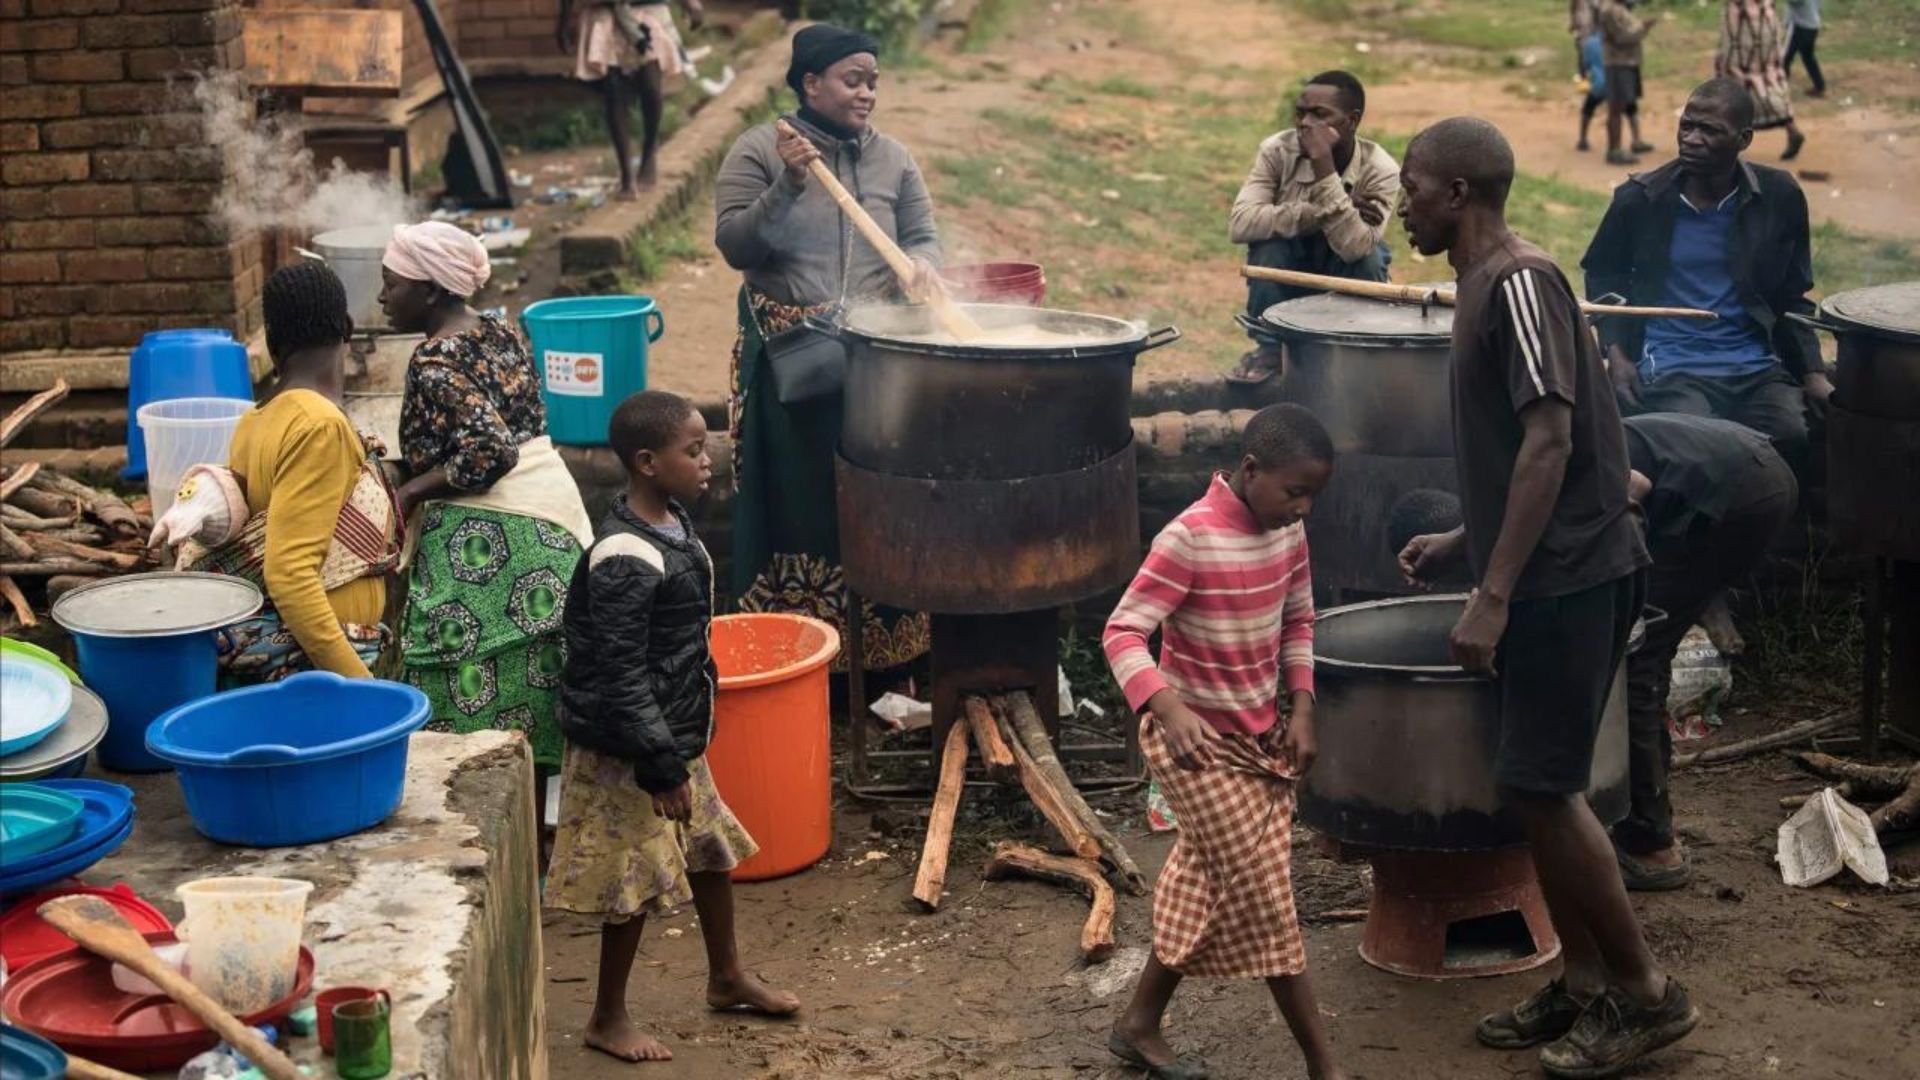 Community volunteers prepare meals for people who were displaced following heavy rains by tropical Cyclone Freddy in Blantyre, southern Malawi, Thursday, March 16, 2023.